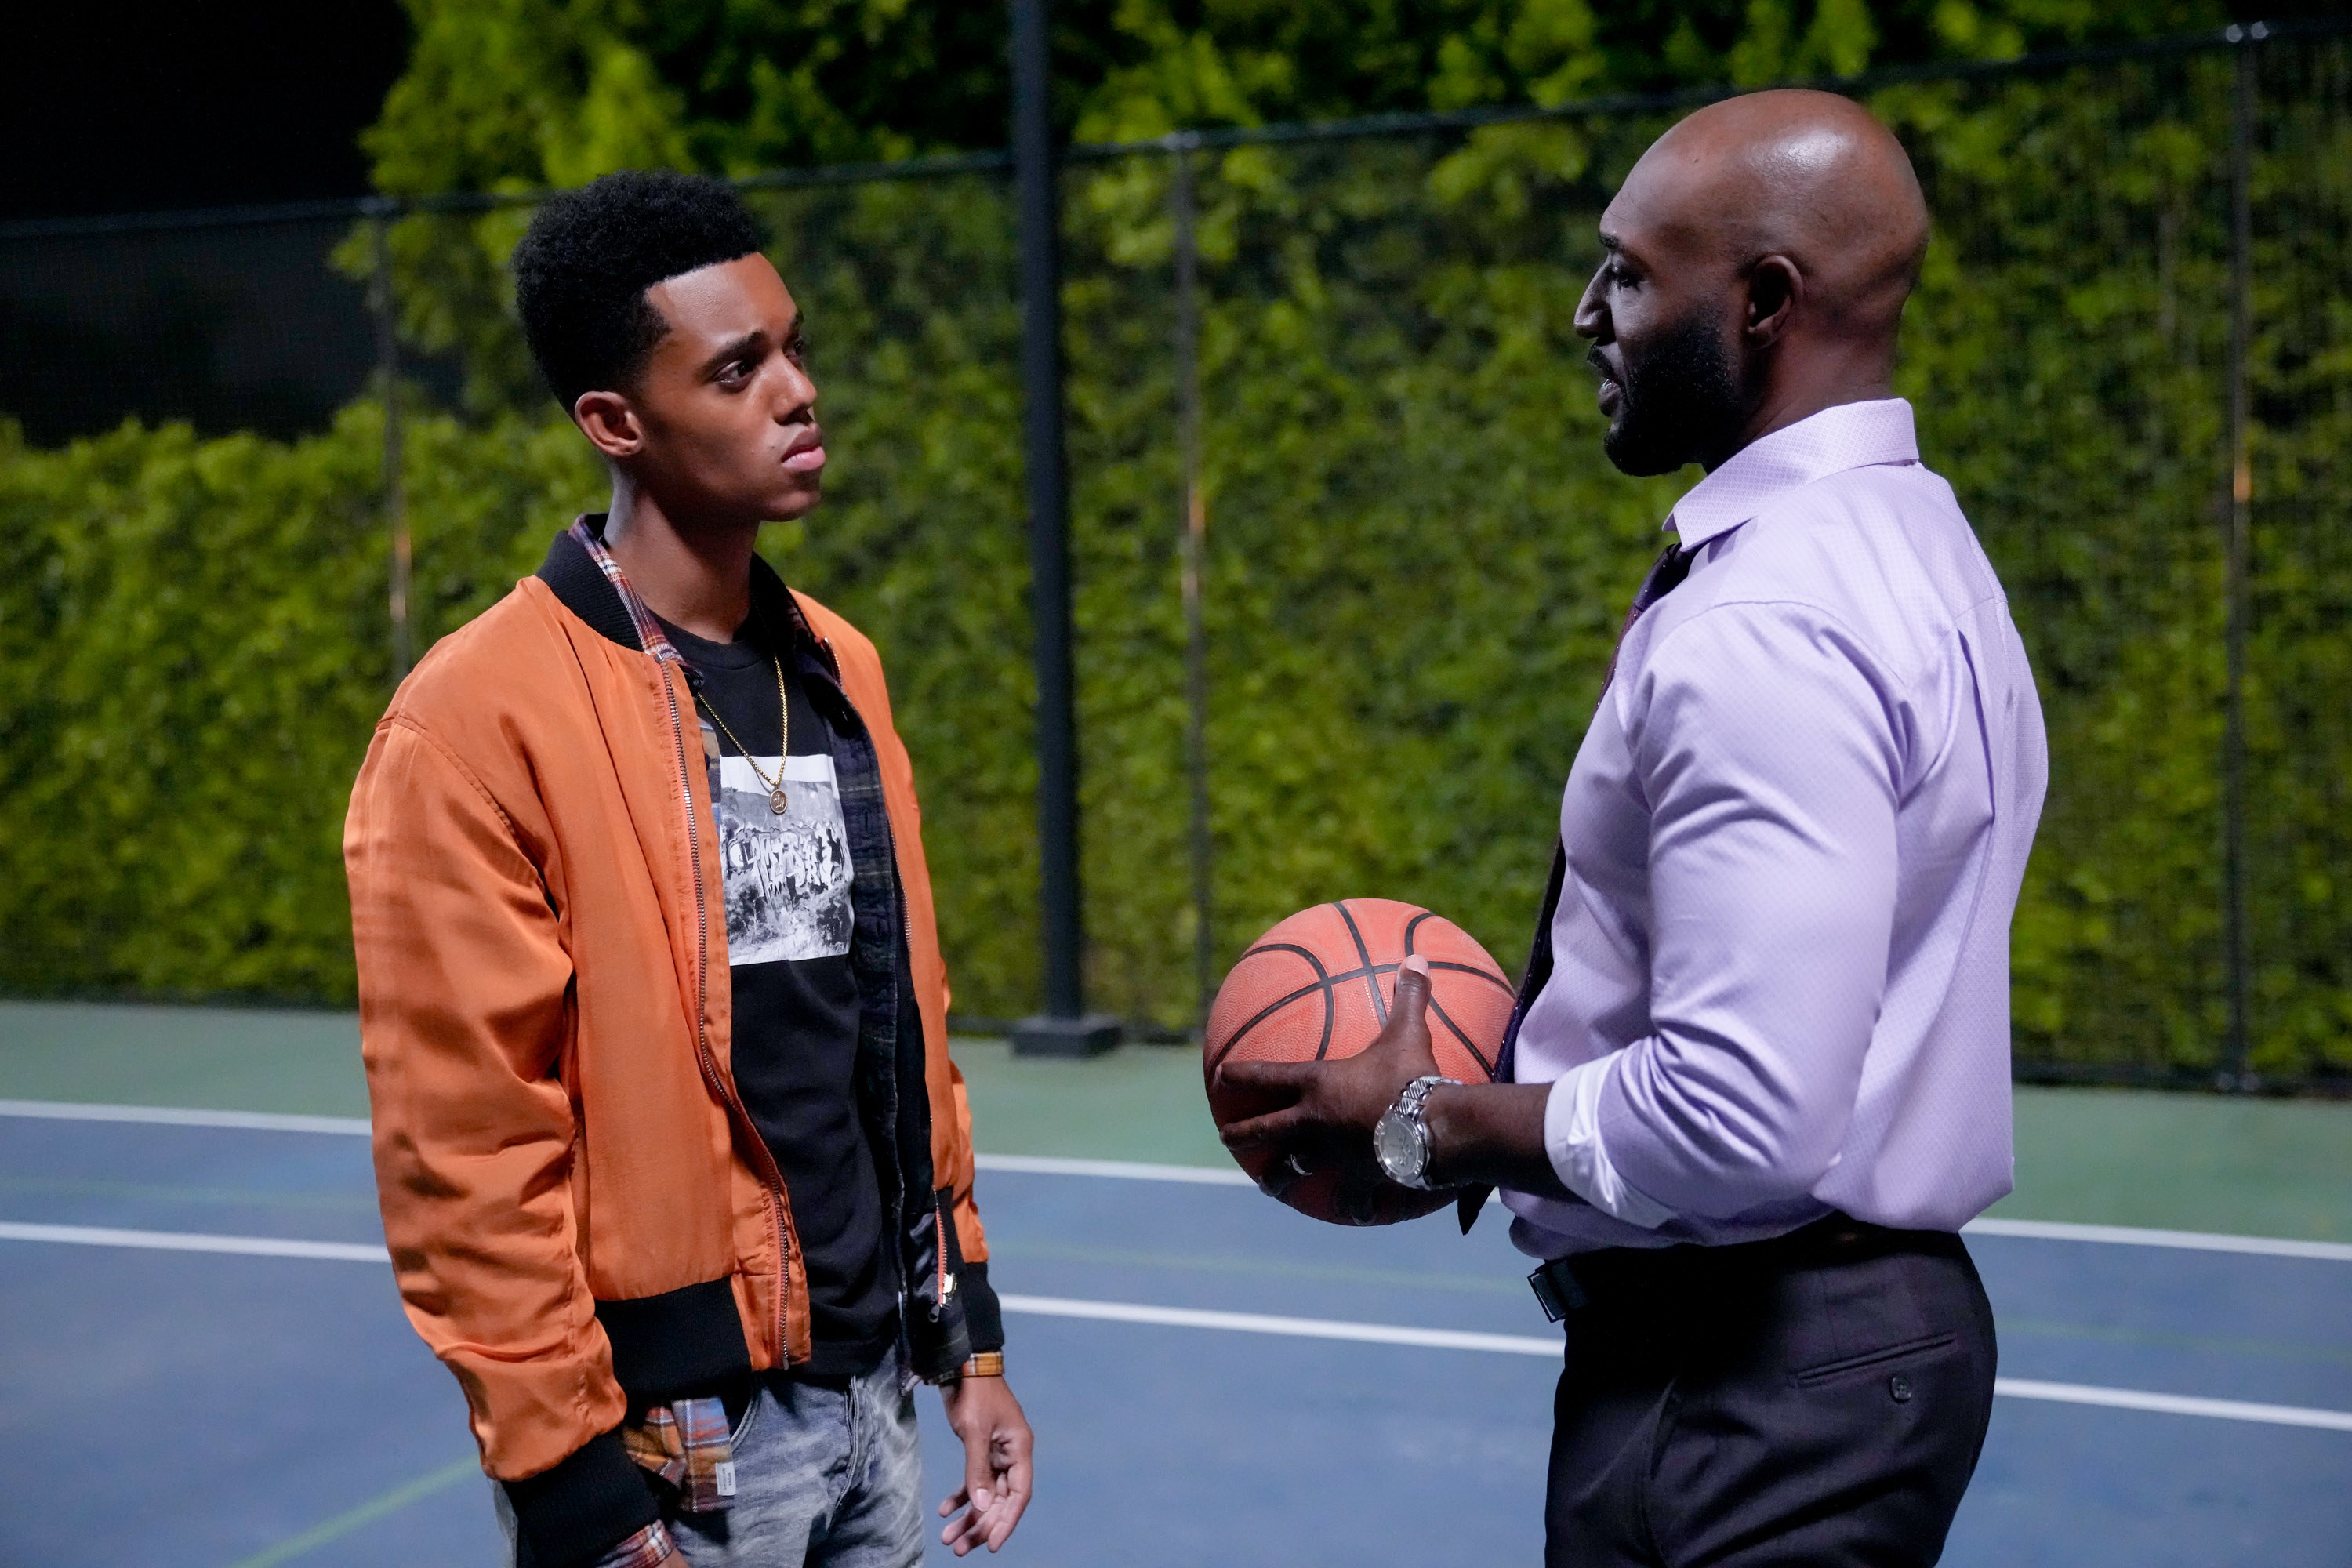 Jabari Banks as Will Smith and Adrian Holmes as Uncle Phil stood on basketball